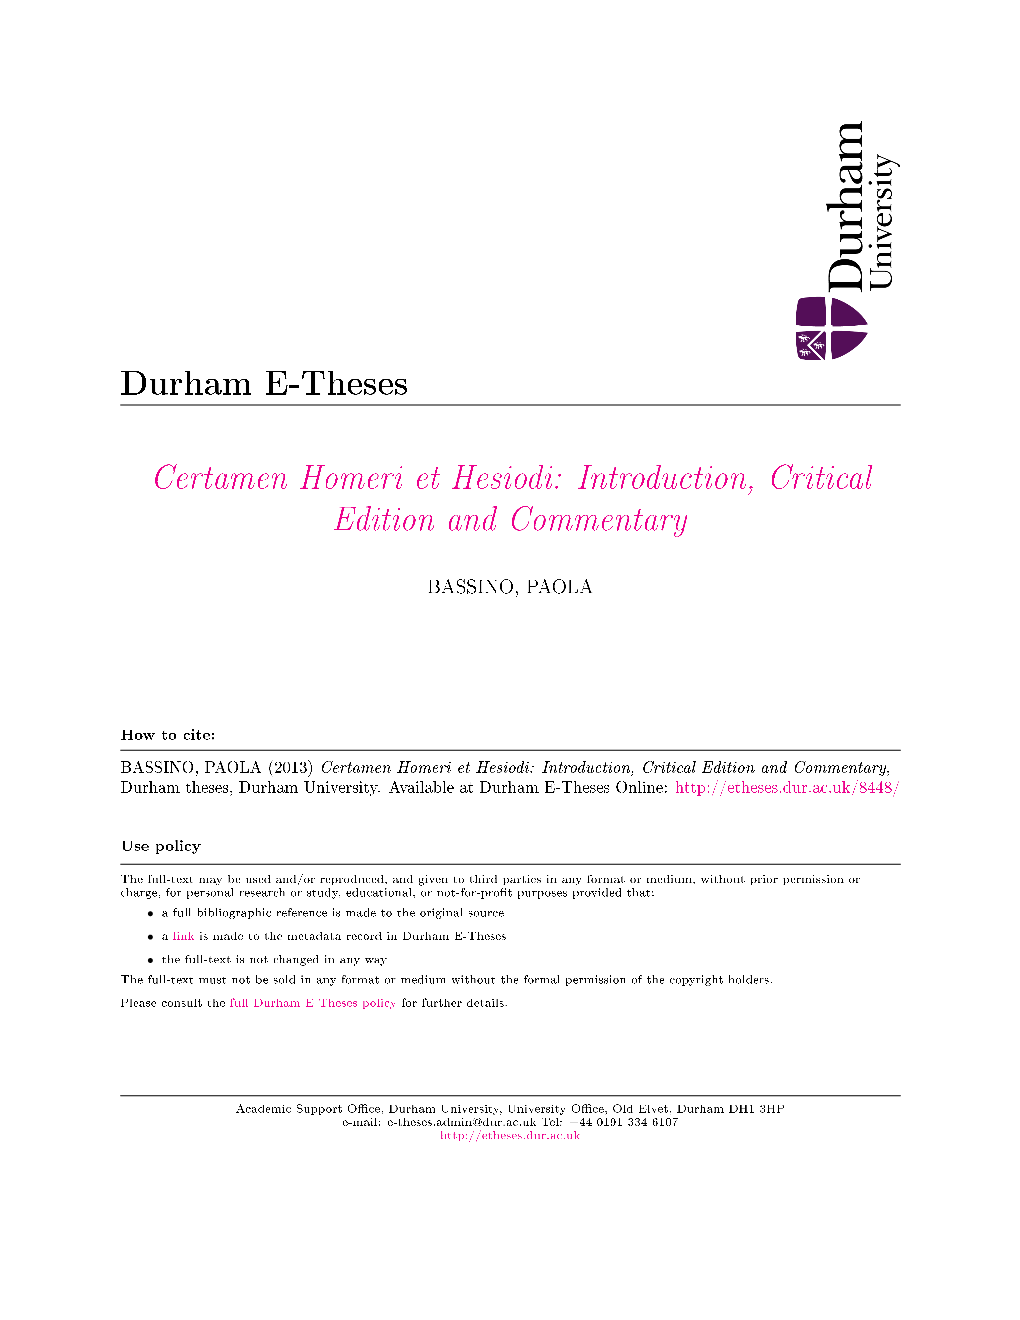 Certamen Homeri Et Hesiodi: Introduction, Critical Edition and Commentary